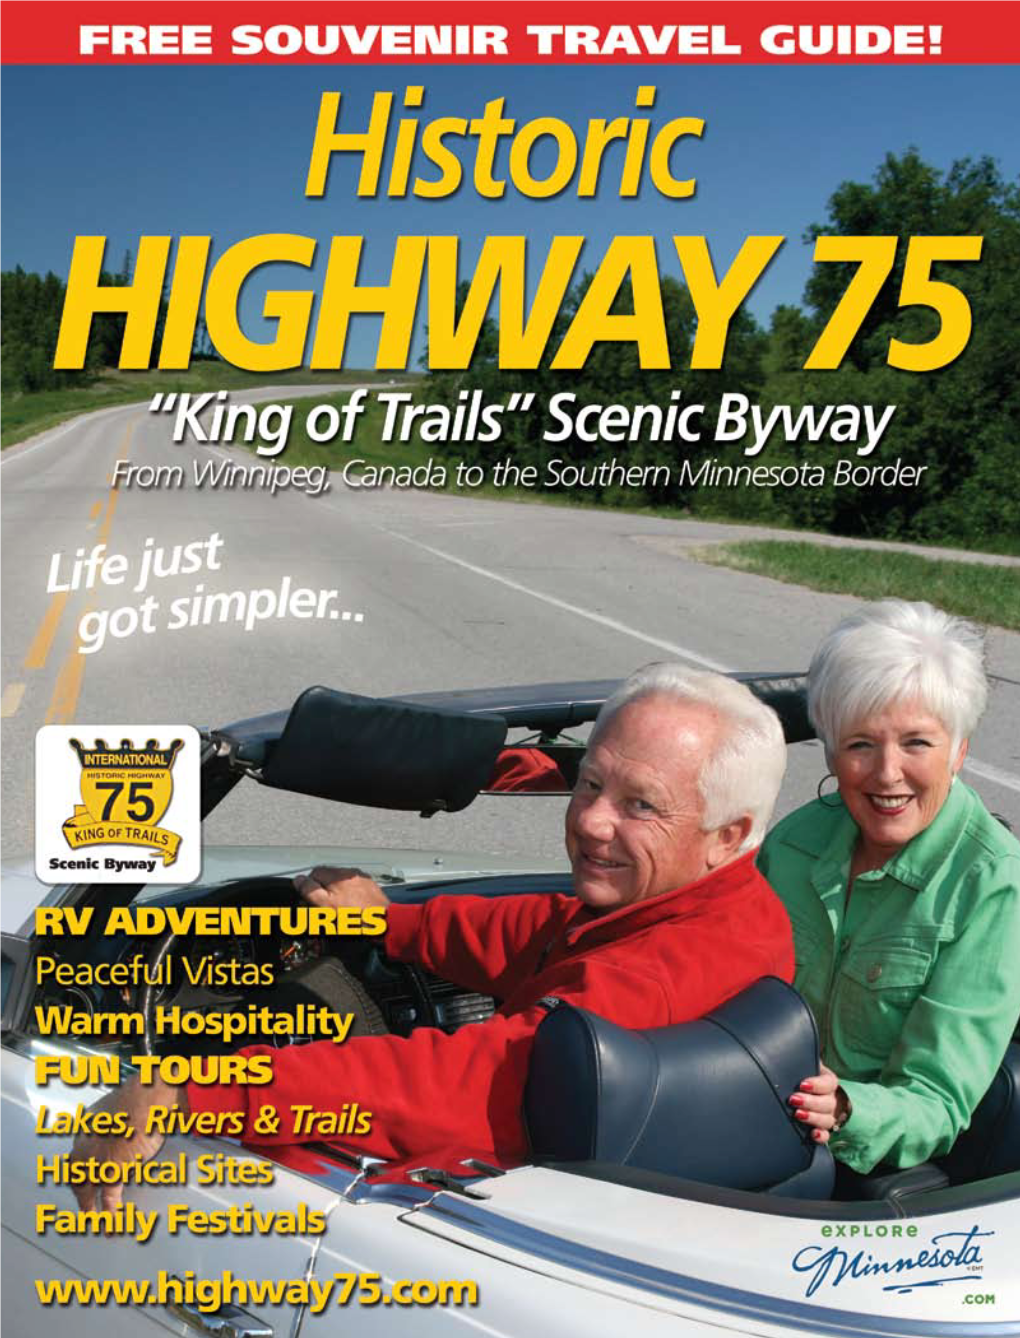 Highway 75 Travel Guide